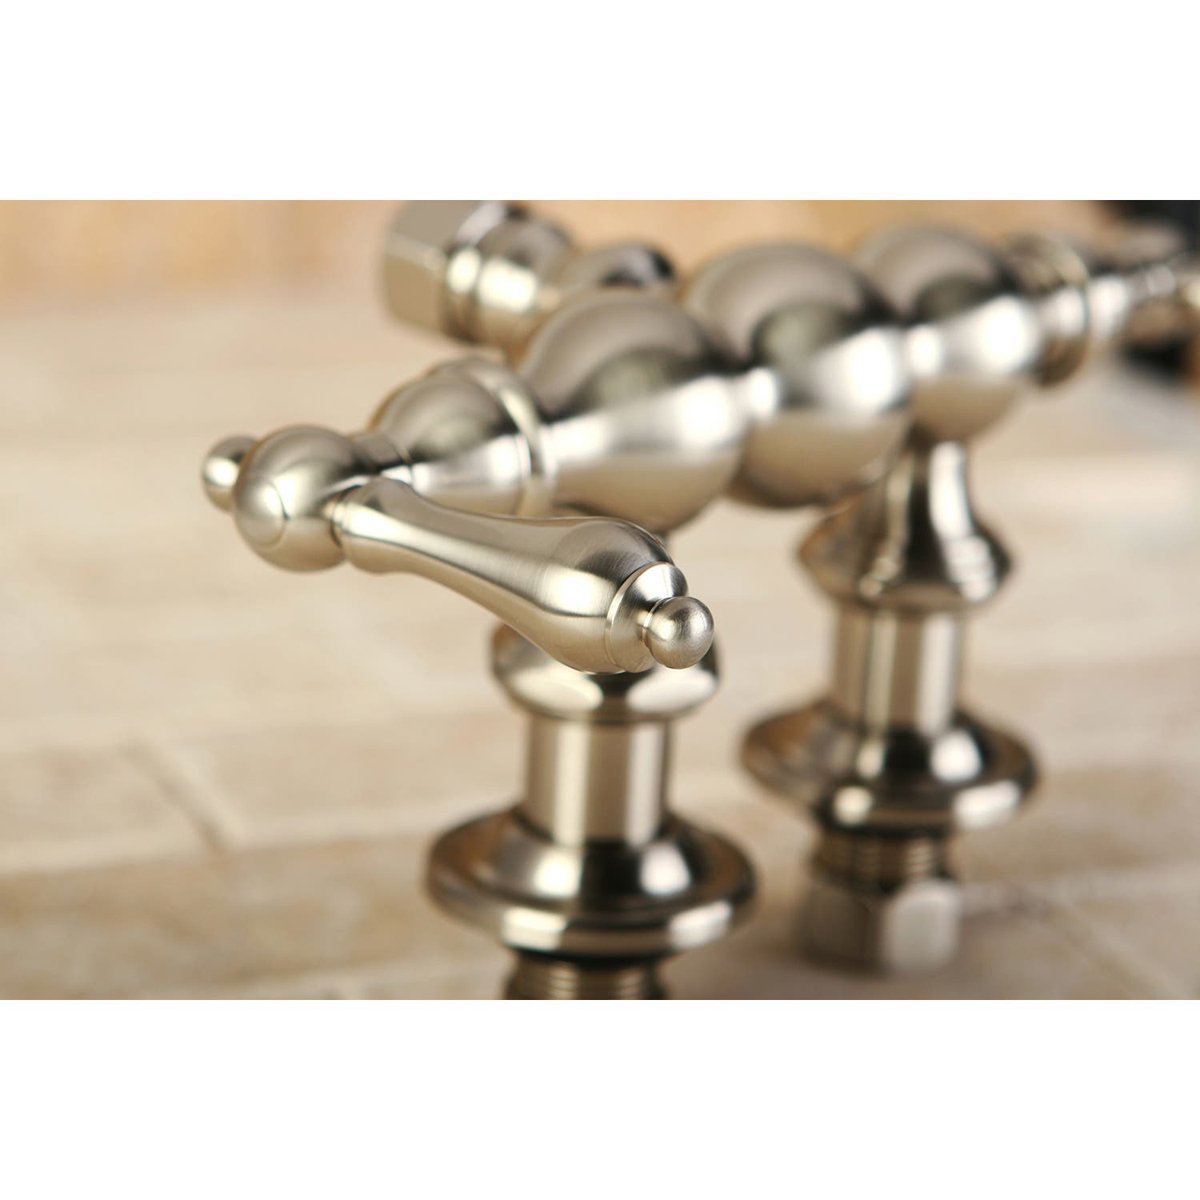 Kingston Brass Vintage Tub Faucet Body Only